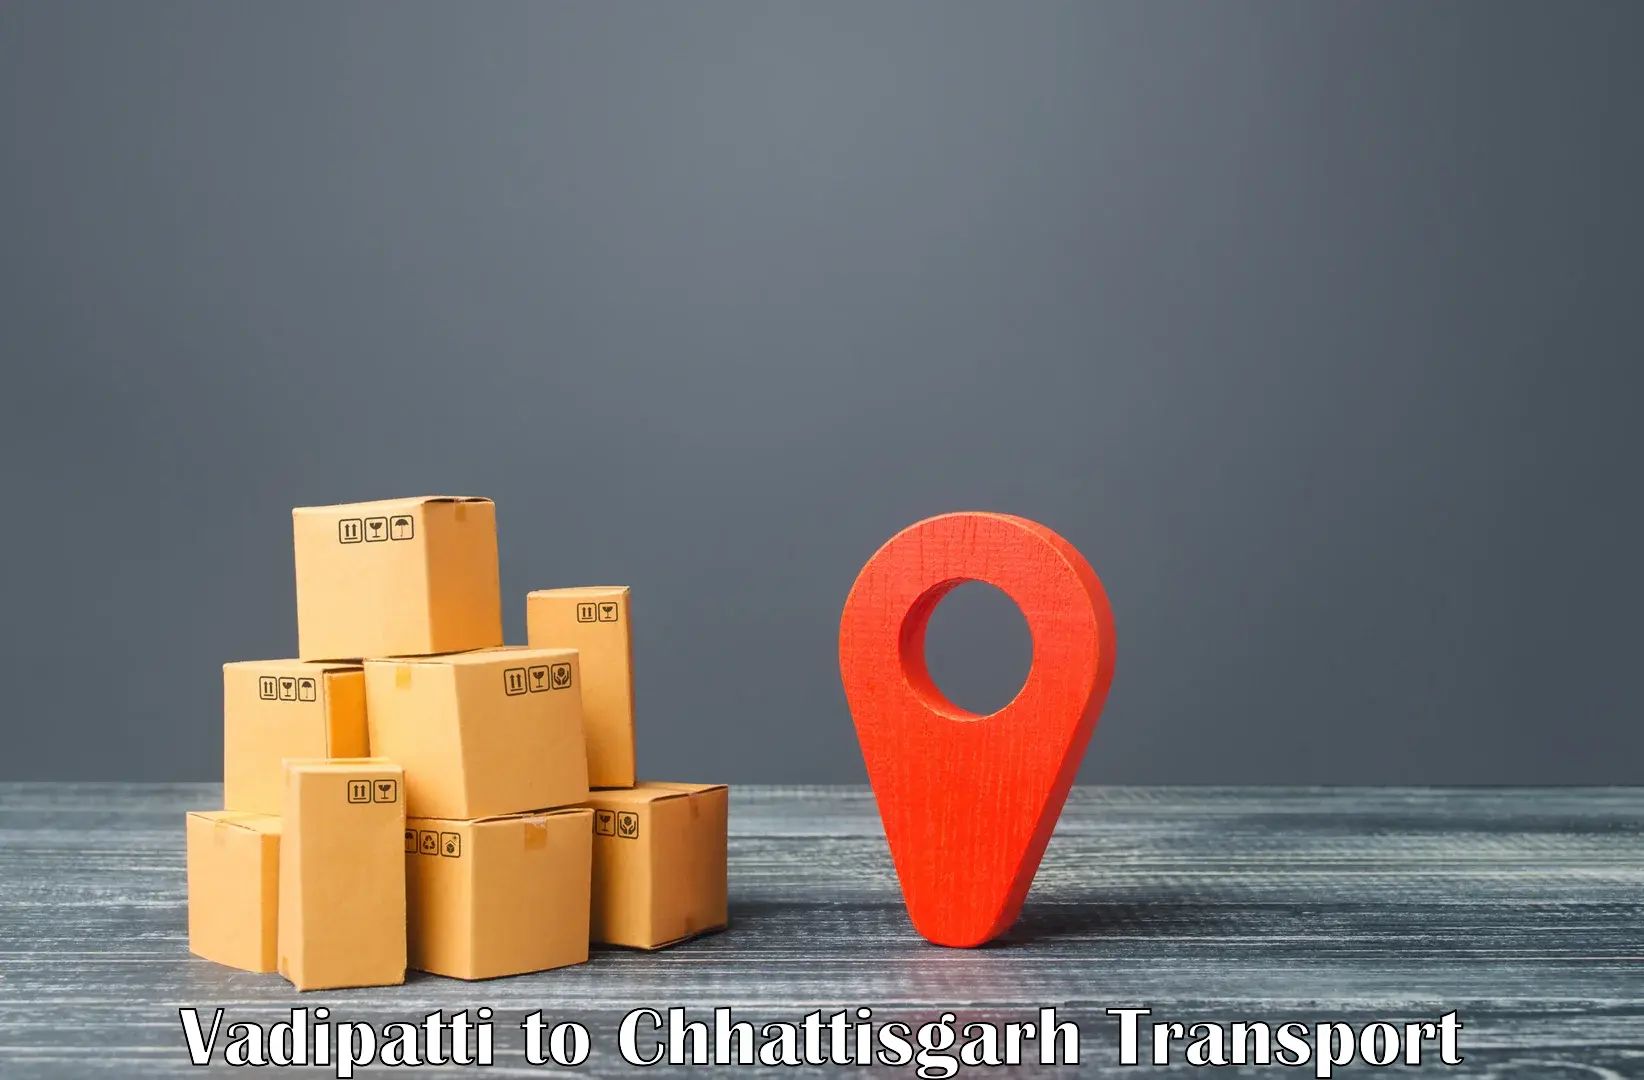 Road transport services in Vadipatti to Dongargarh